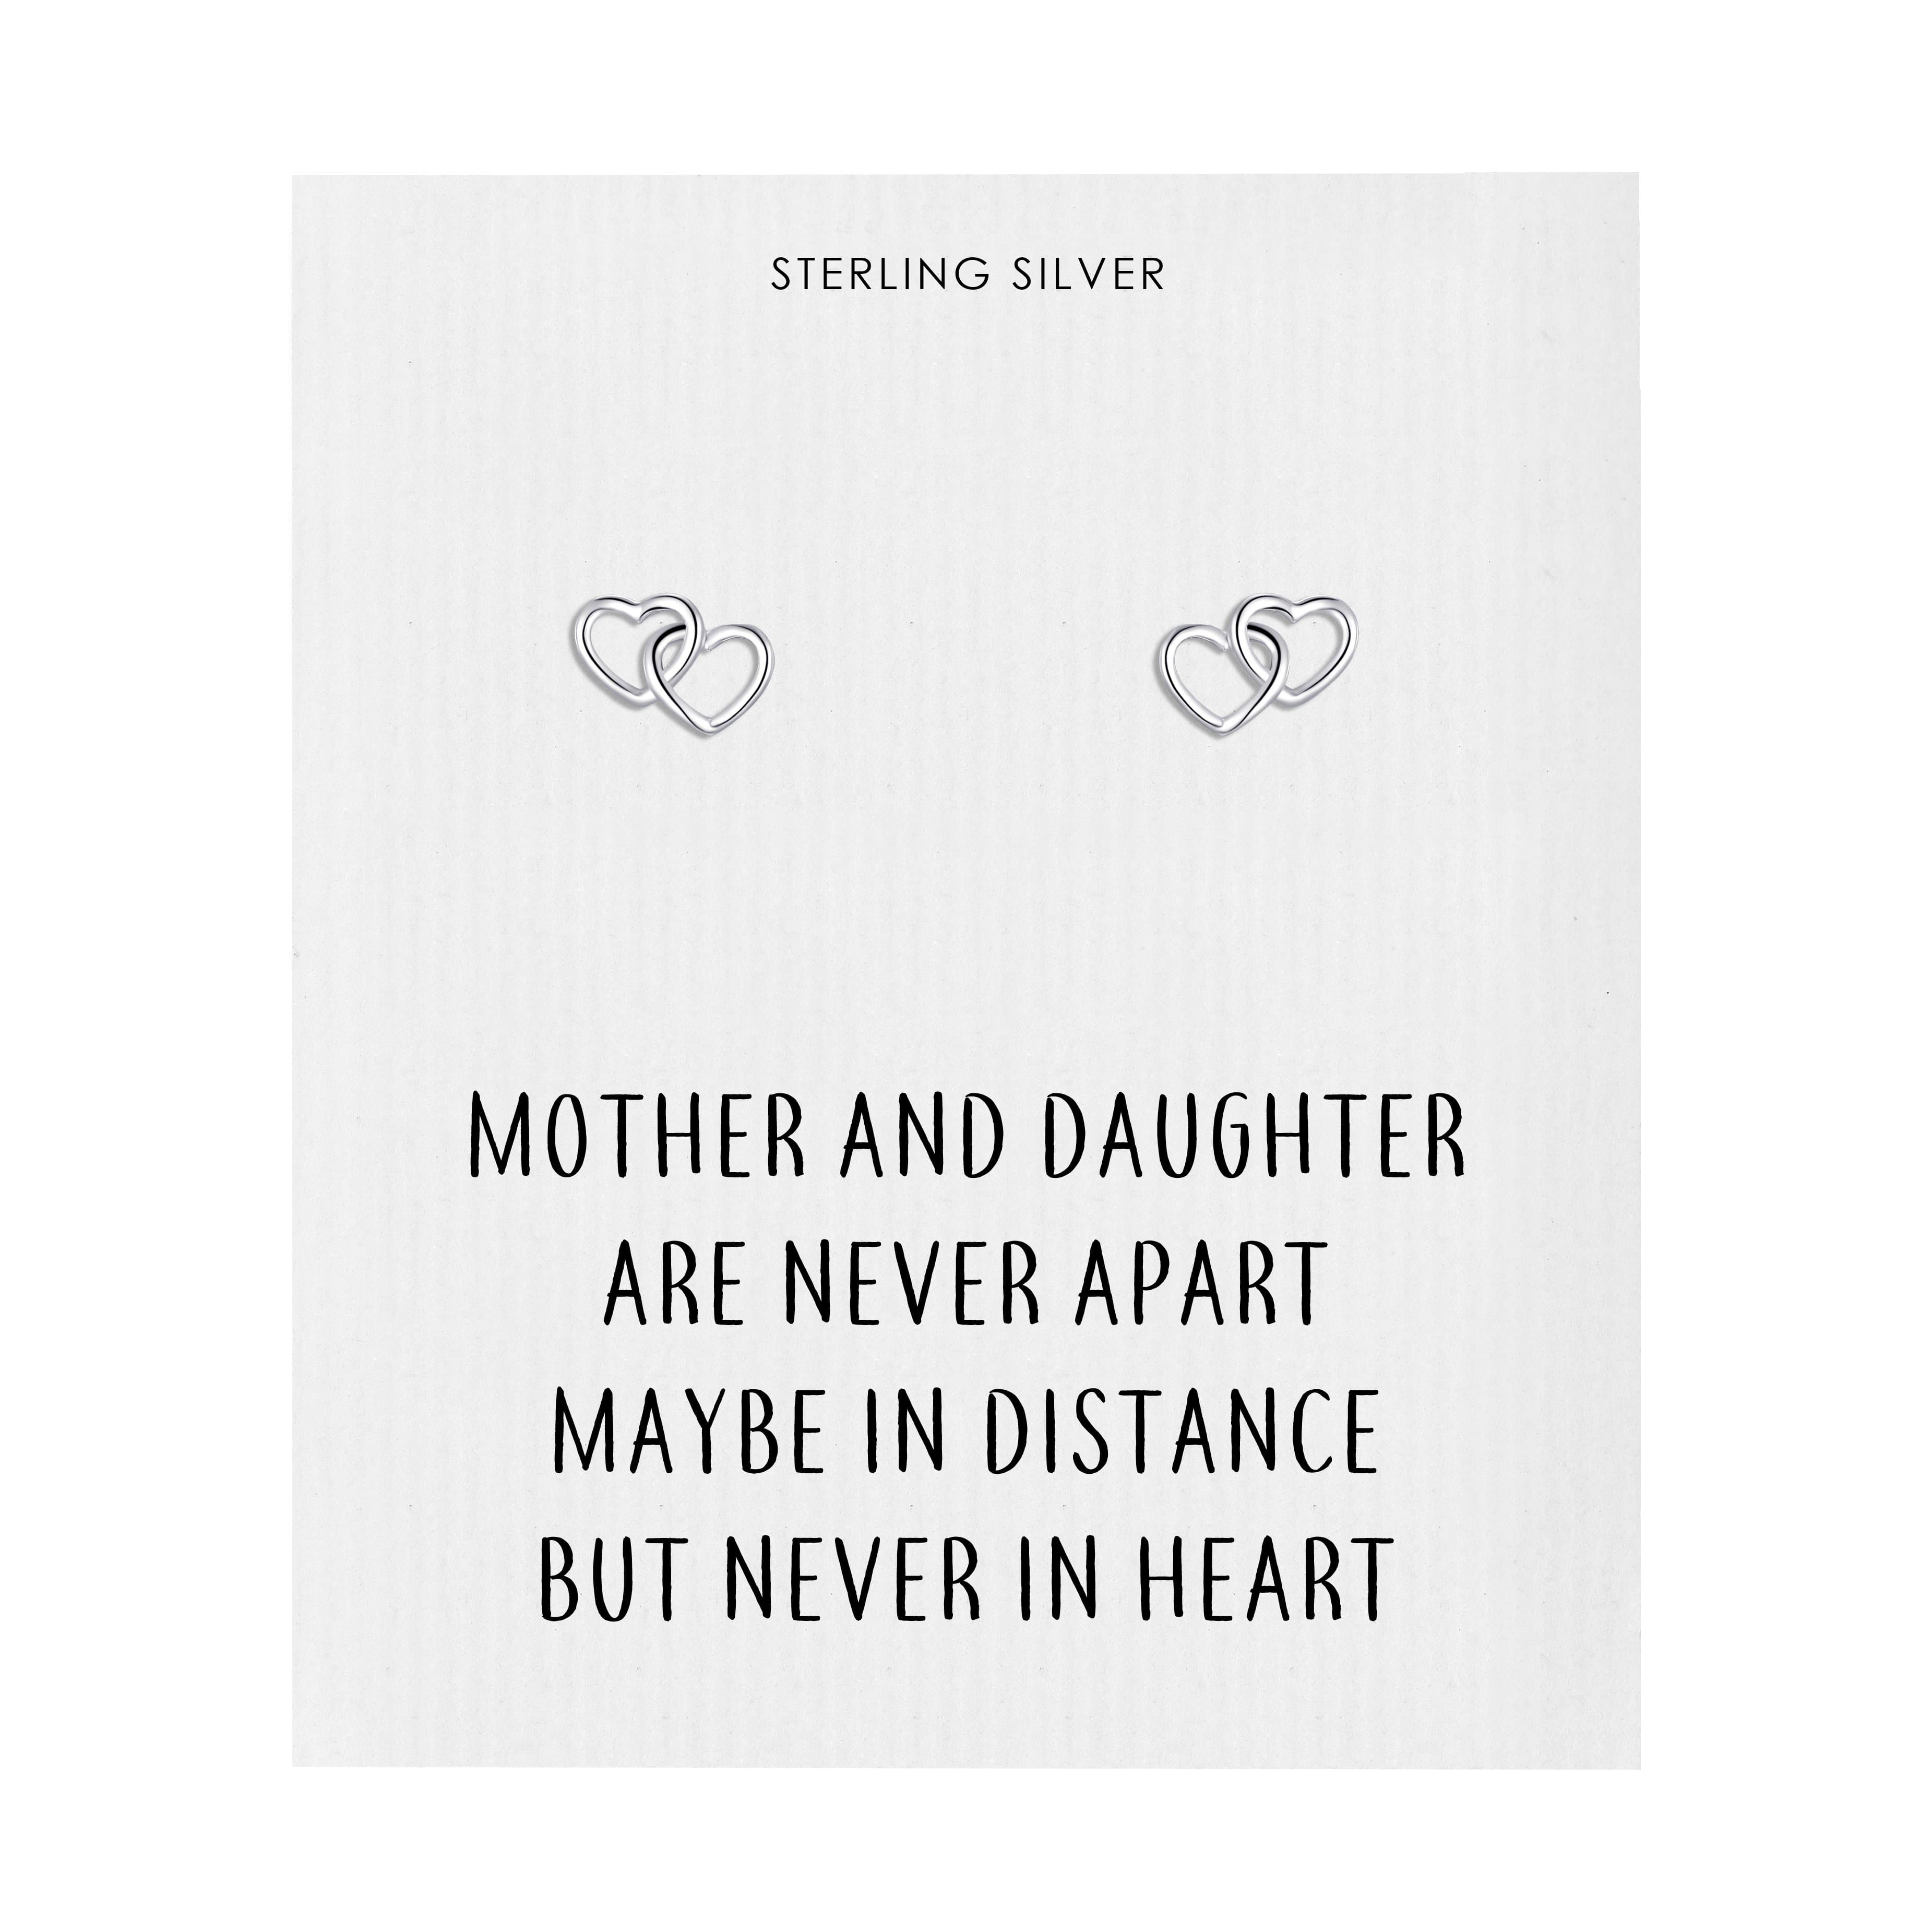 Sterling Silver Mother and Daughter Quote Heart Link Earrings by Philip Jones Jewellery